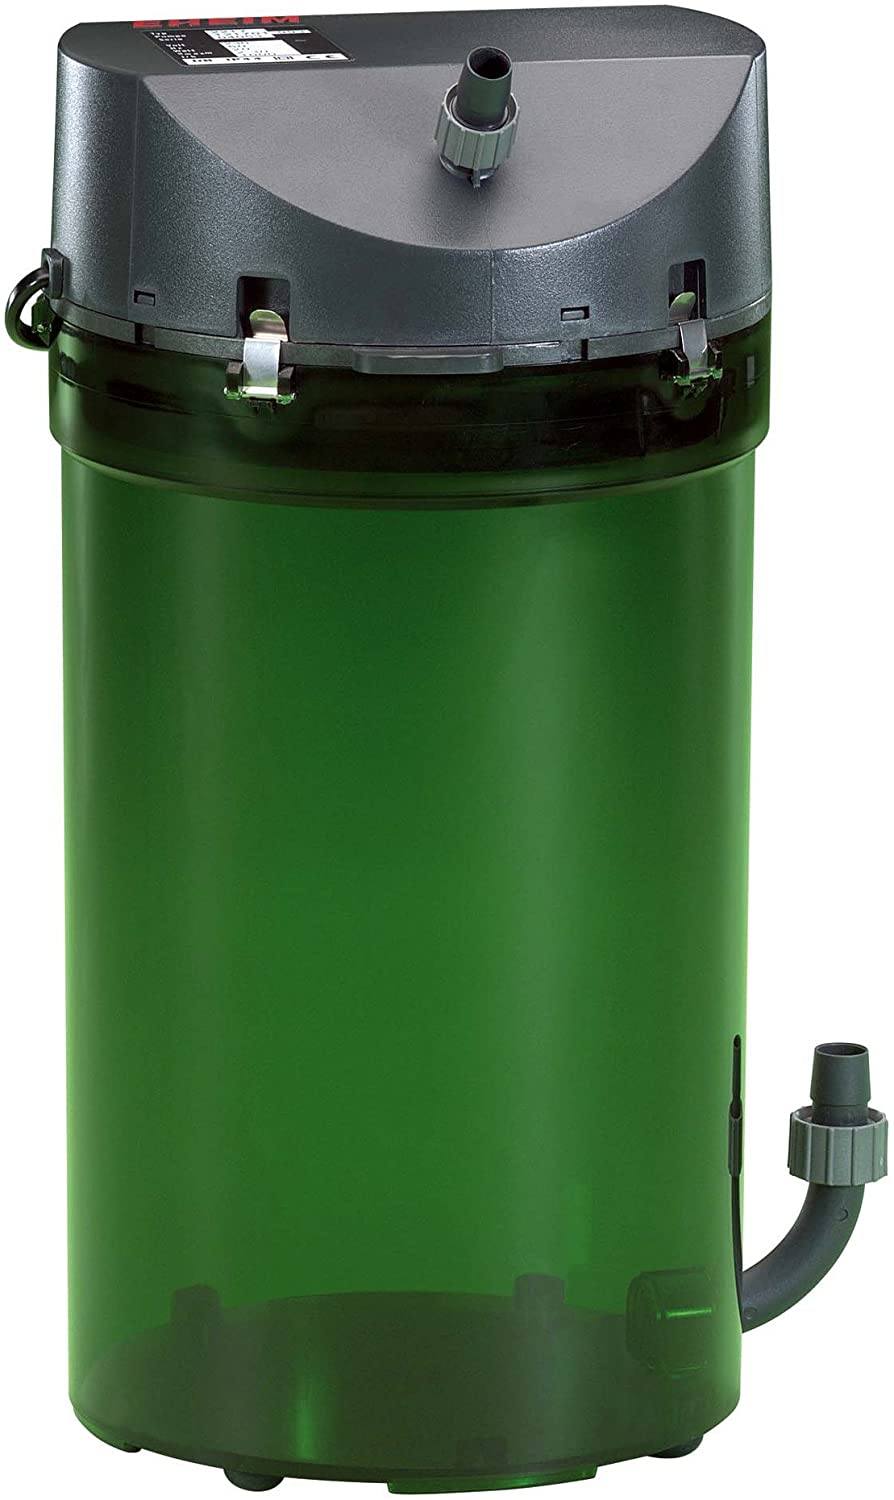 Eheim Classic Canister Filter with Media - 2217  